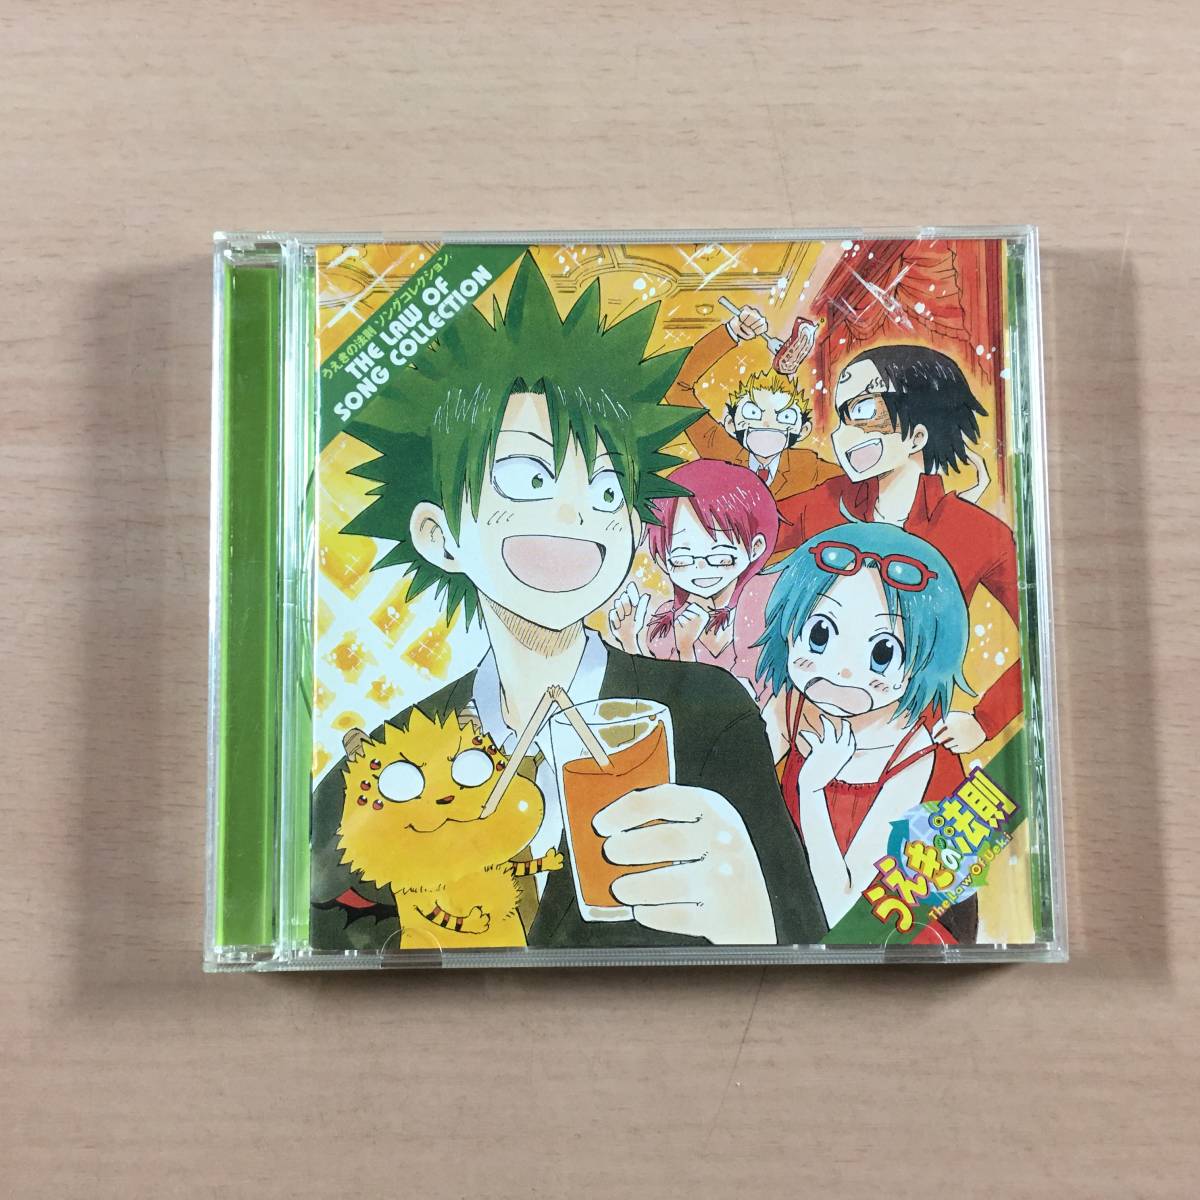 CD うえきの法則 THE LAW OF SONG COLLECTION ソングコレクション